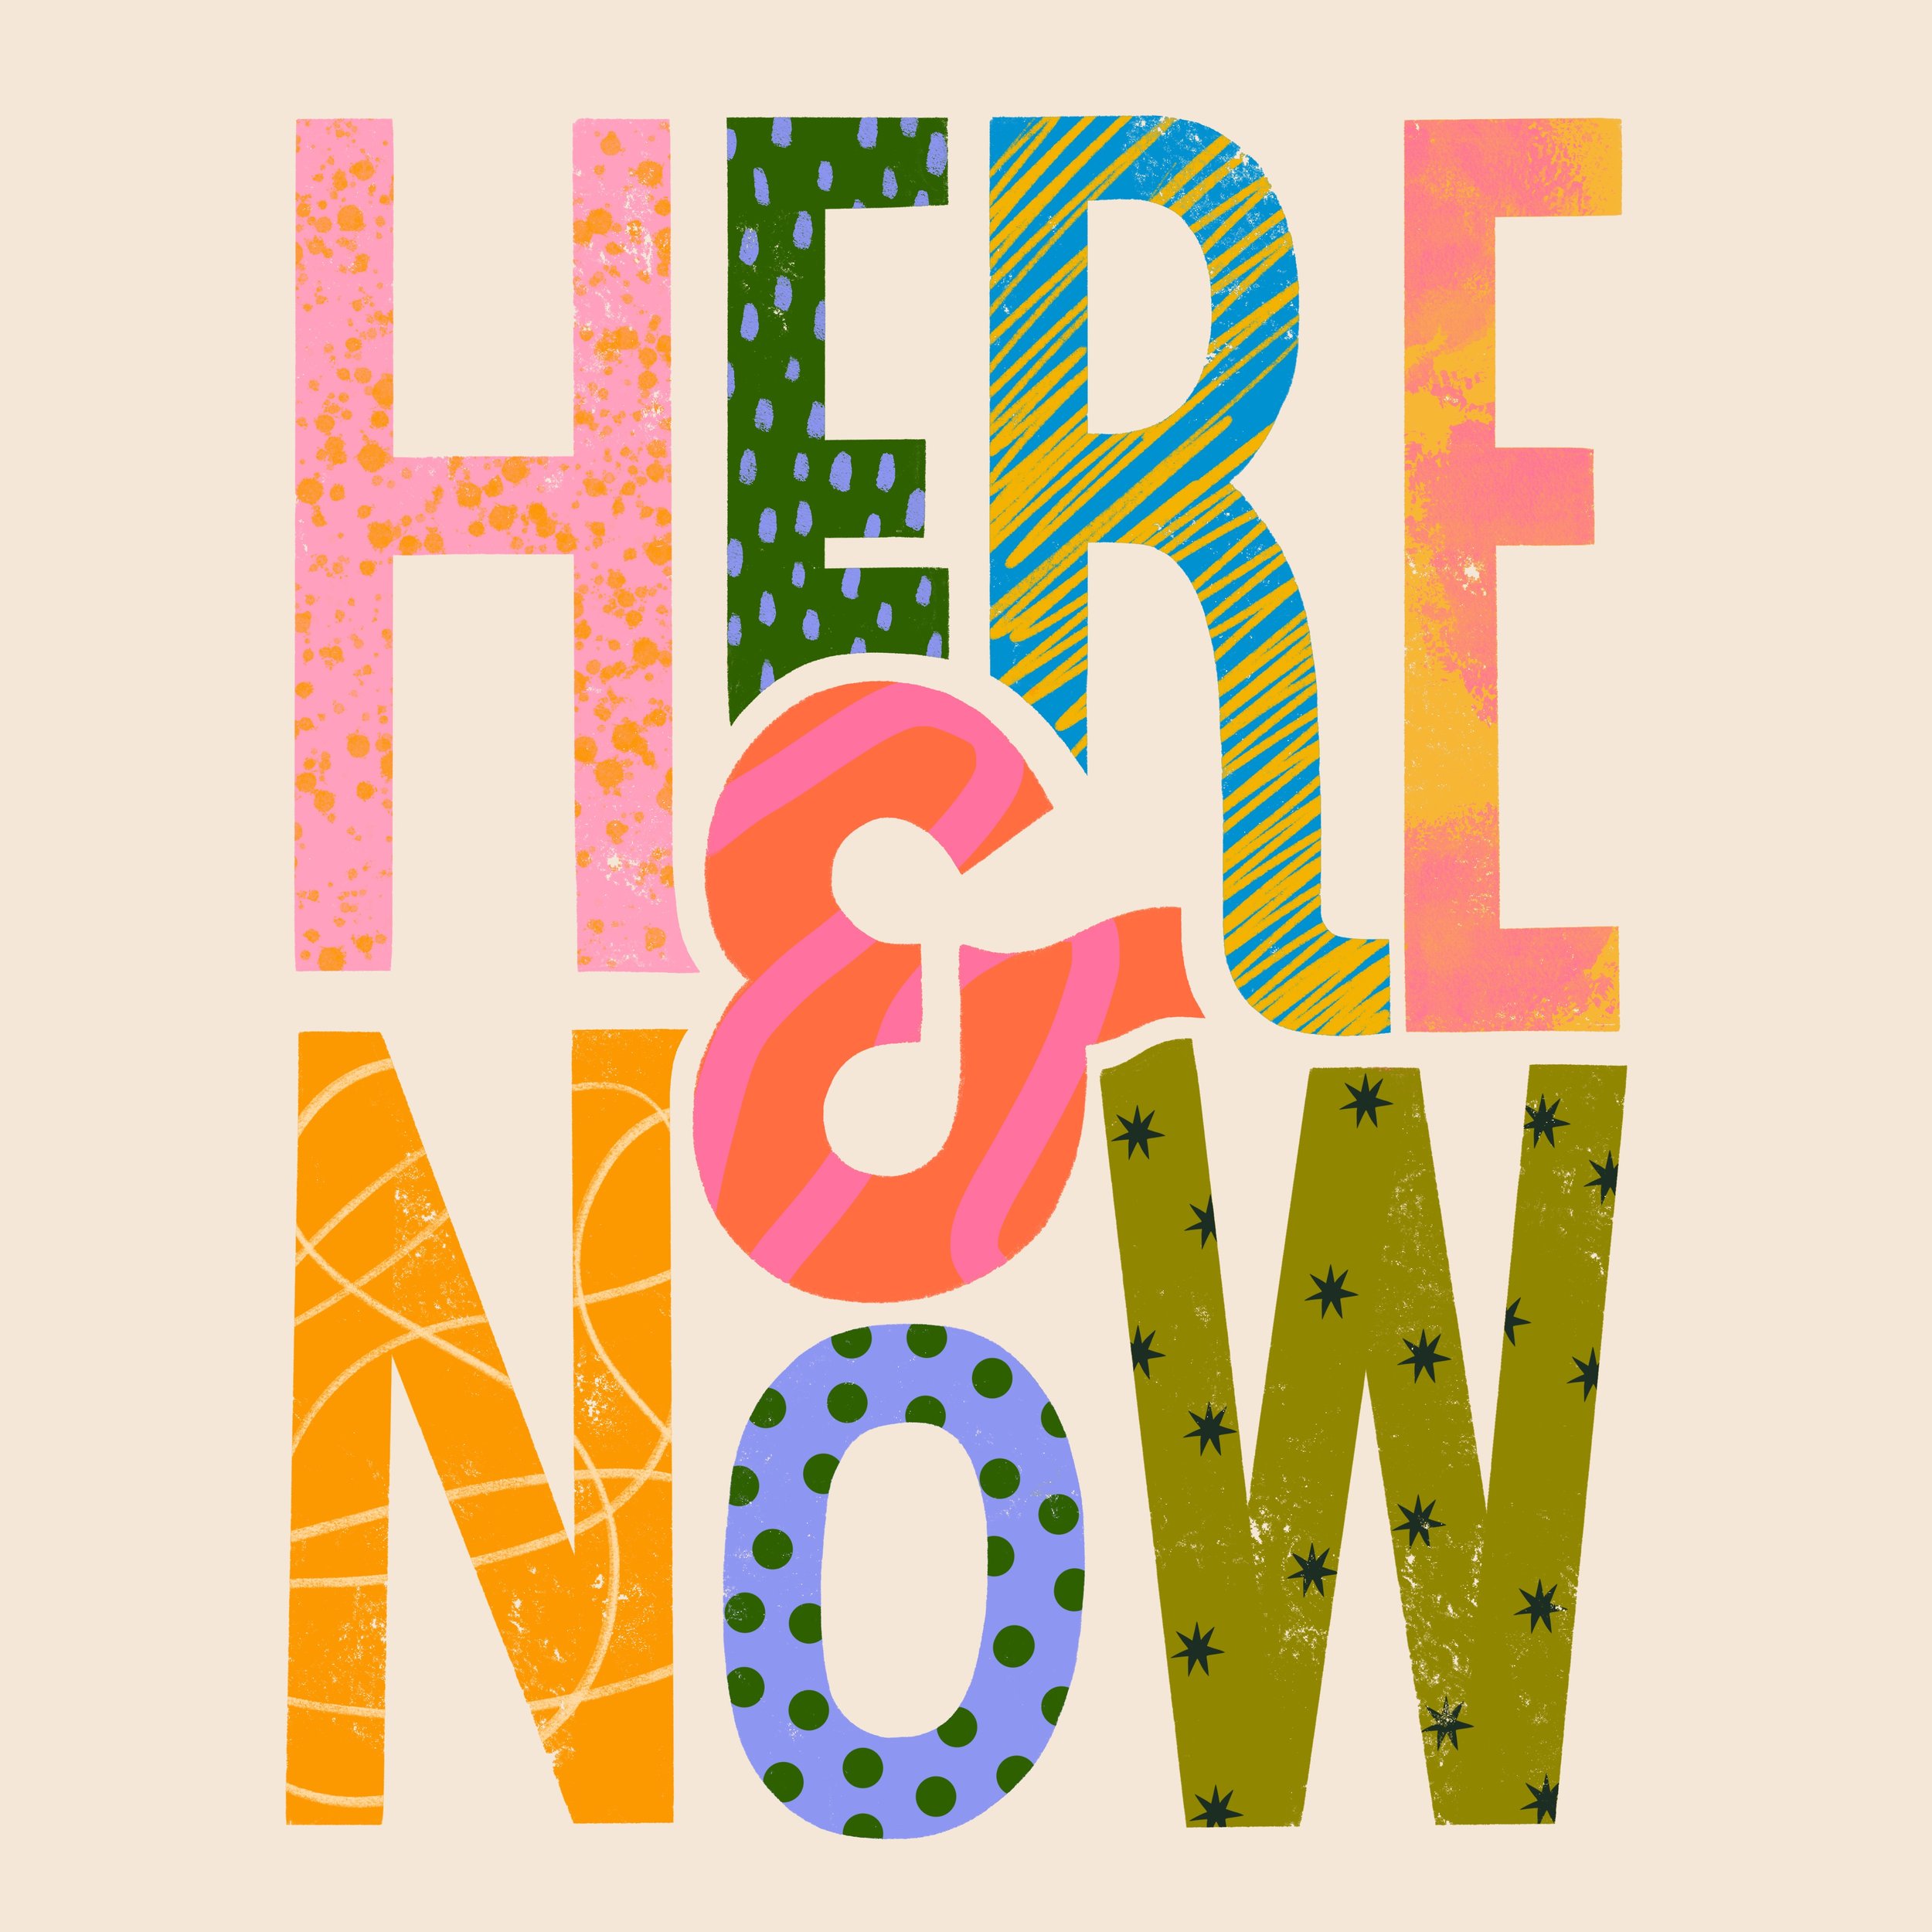 Here and Now